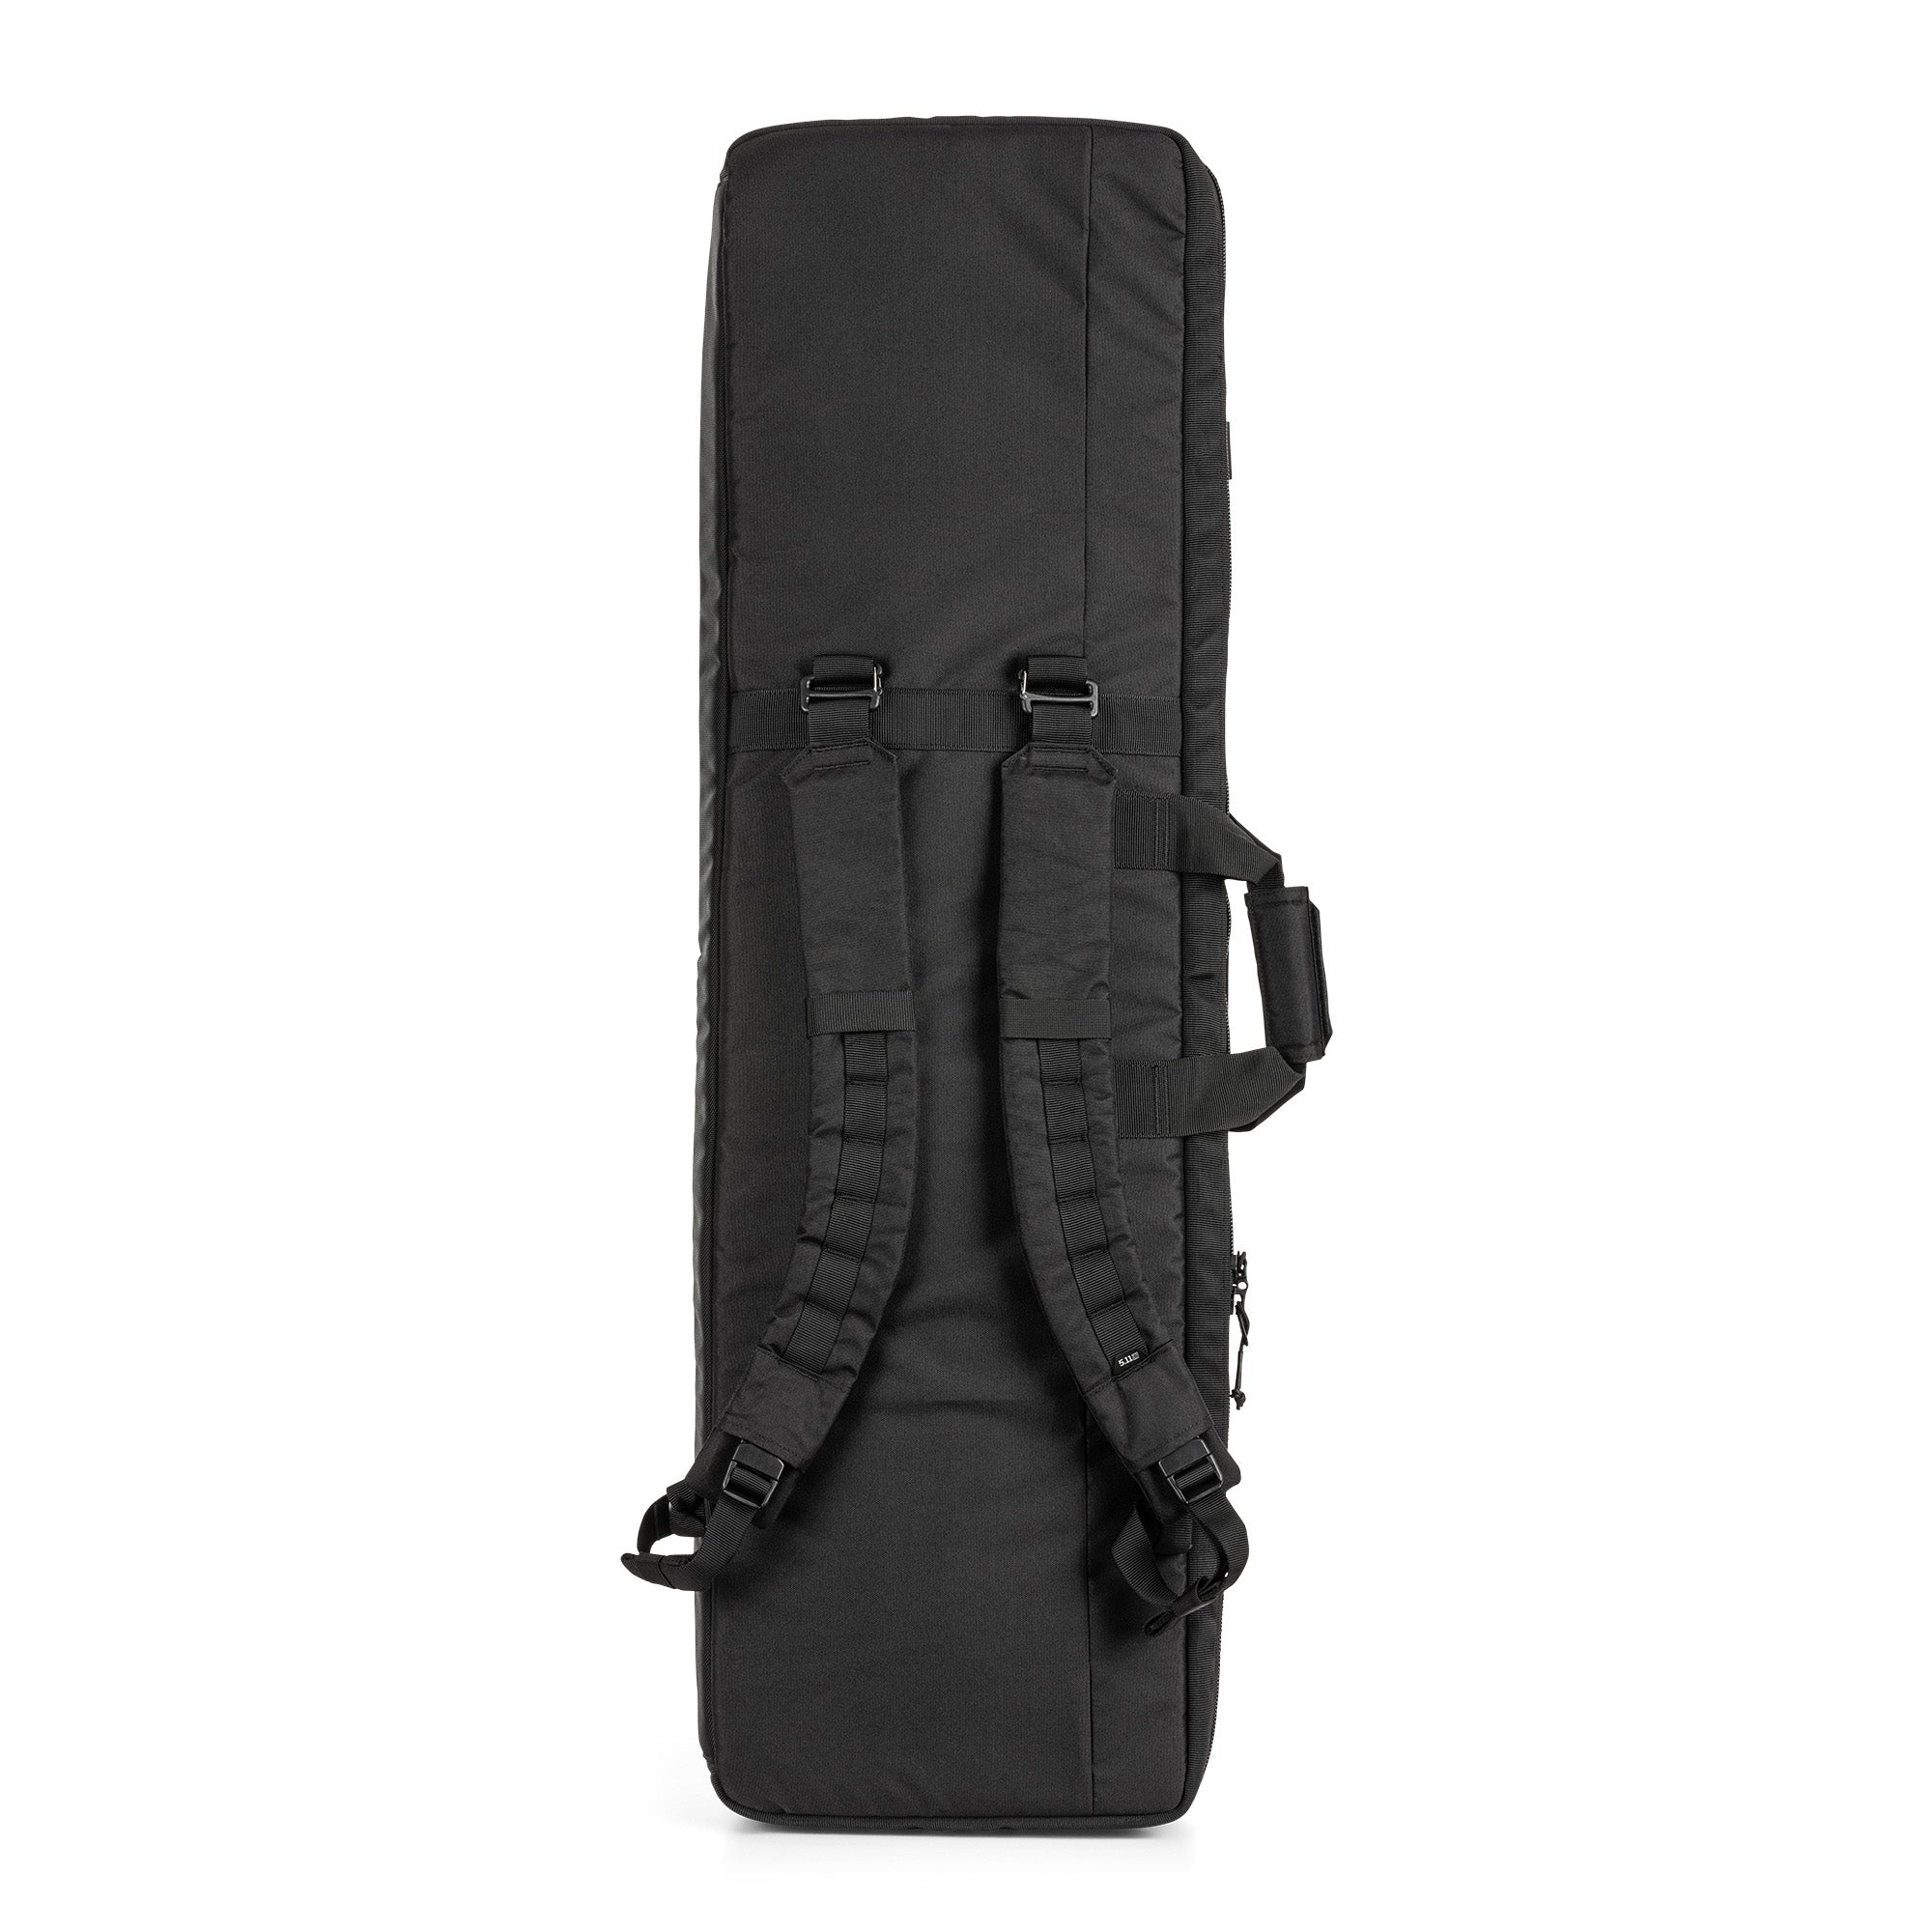 5.11 Tactical 42" Double Rifle Case Bags, Packs and Cases 5.11 Tactical Tactical Gear Supplier Tactical Distributors Australia